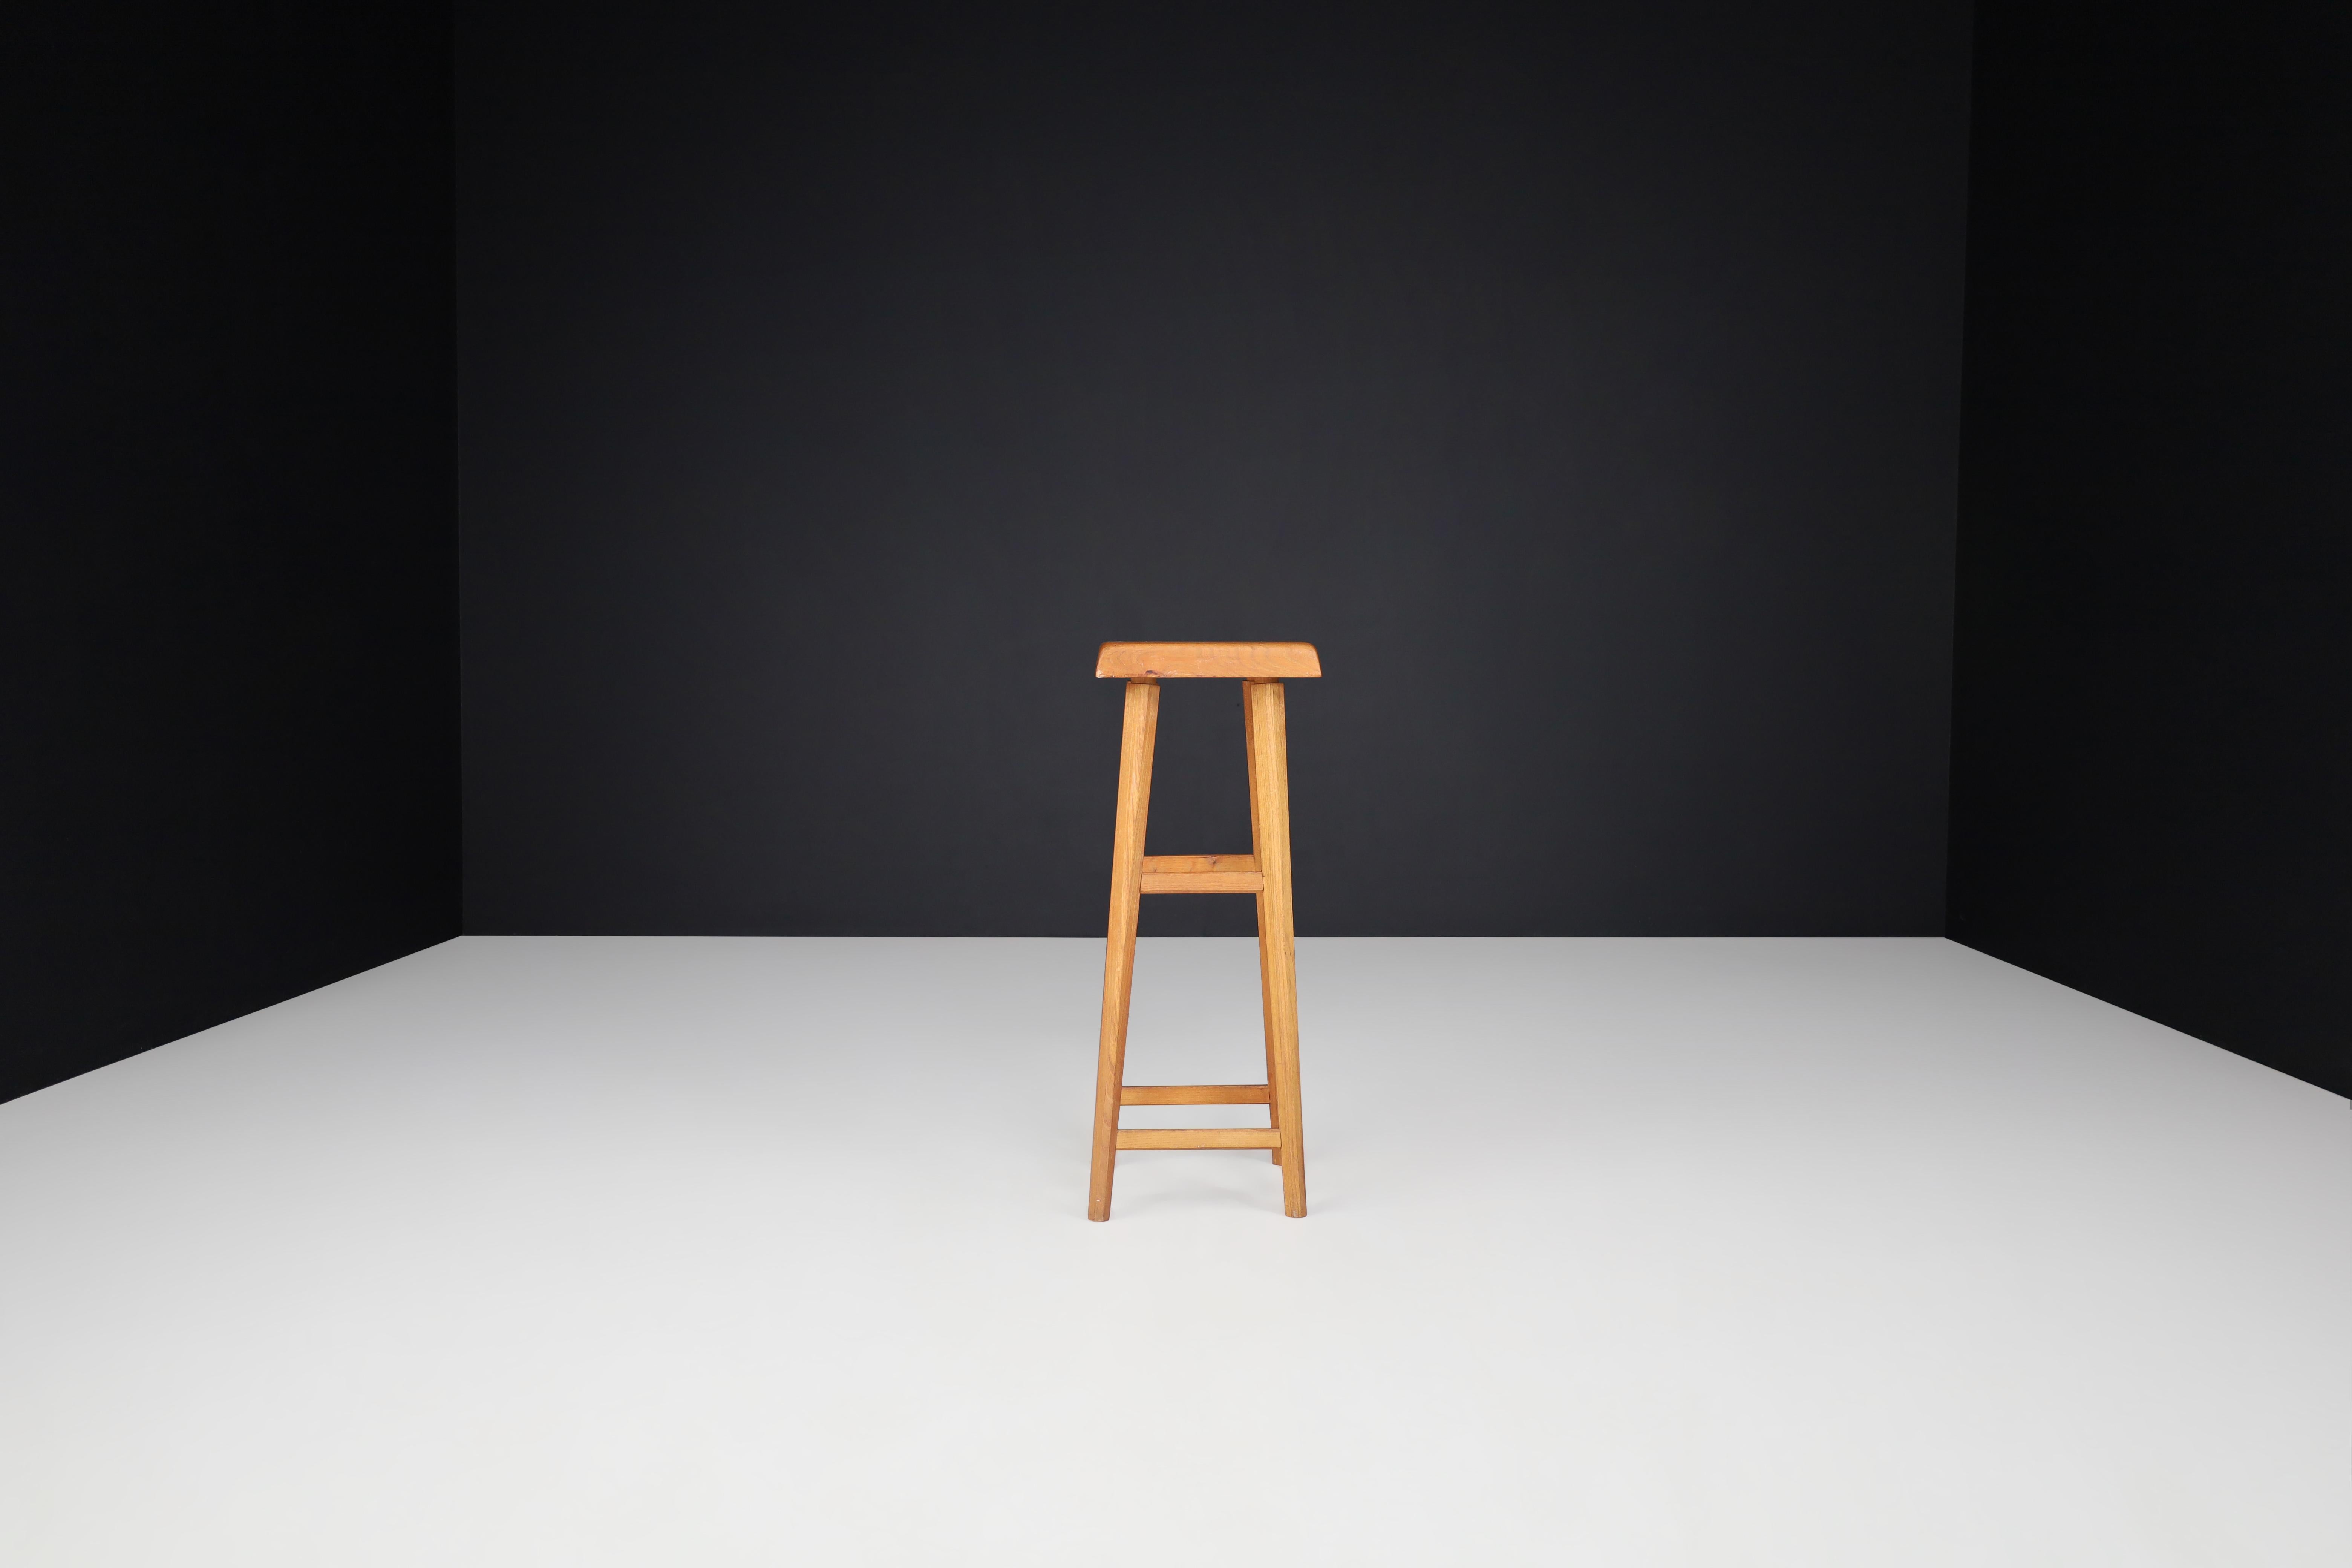 Pierre Chapo, Elm bar stool S-01-C. France, 1970.

Bar tabouret - stool model S-01-C created by Pierre Chapo, France, 1970s. This stool is made out of solid elmwood with all original patina. In good original condition, with minor wear consistent